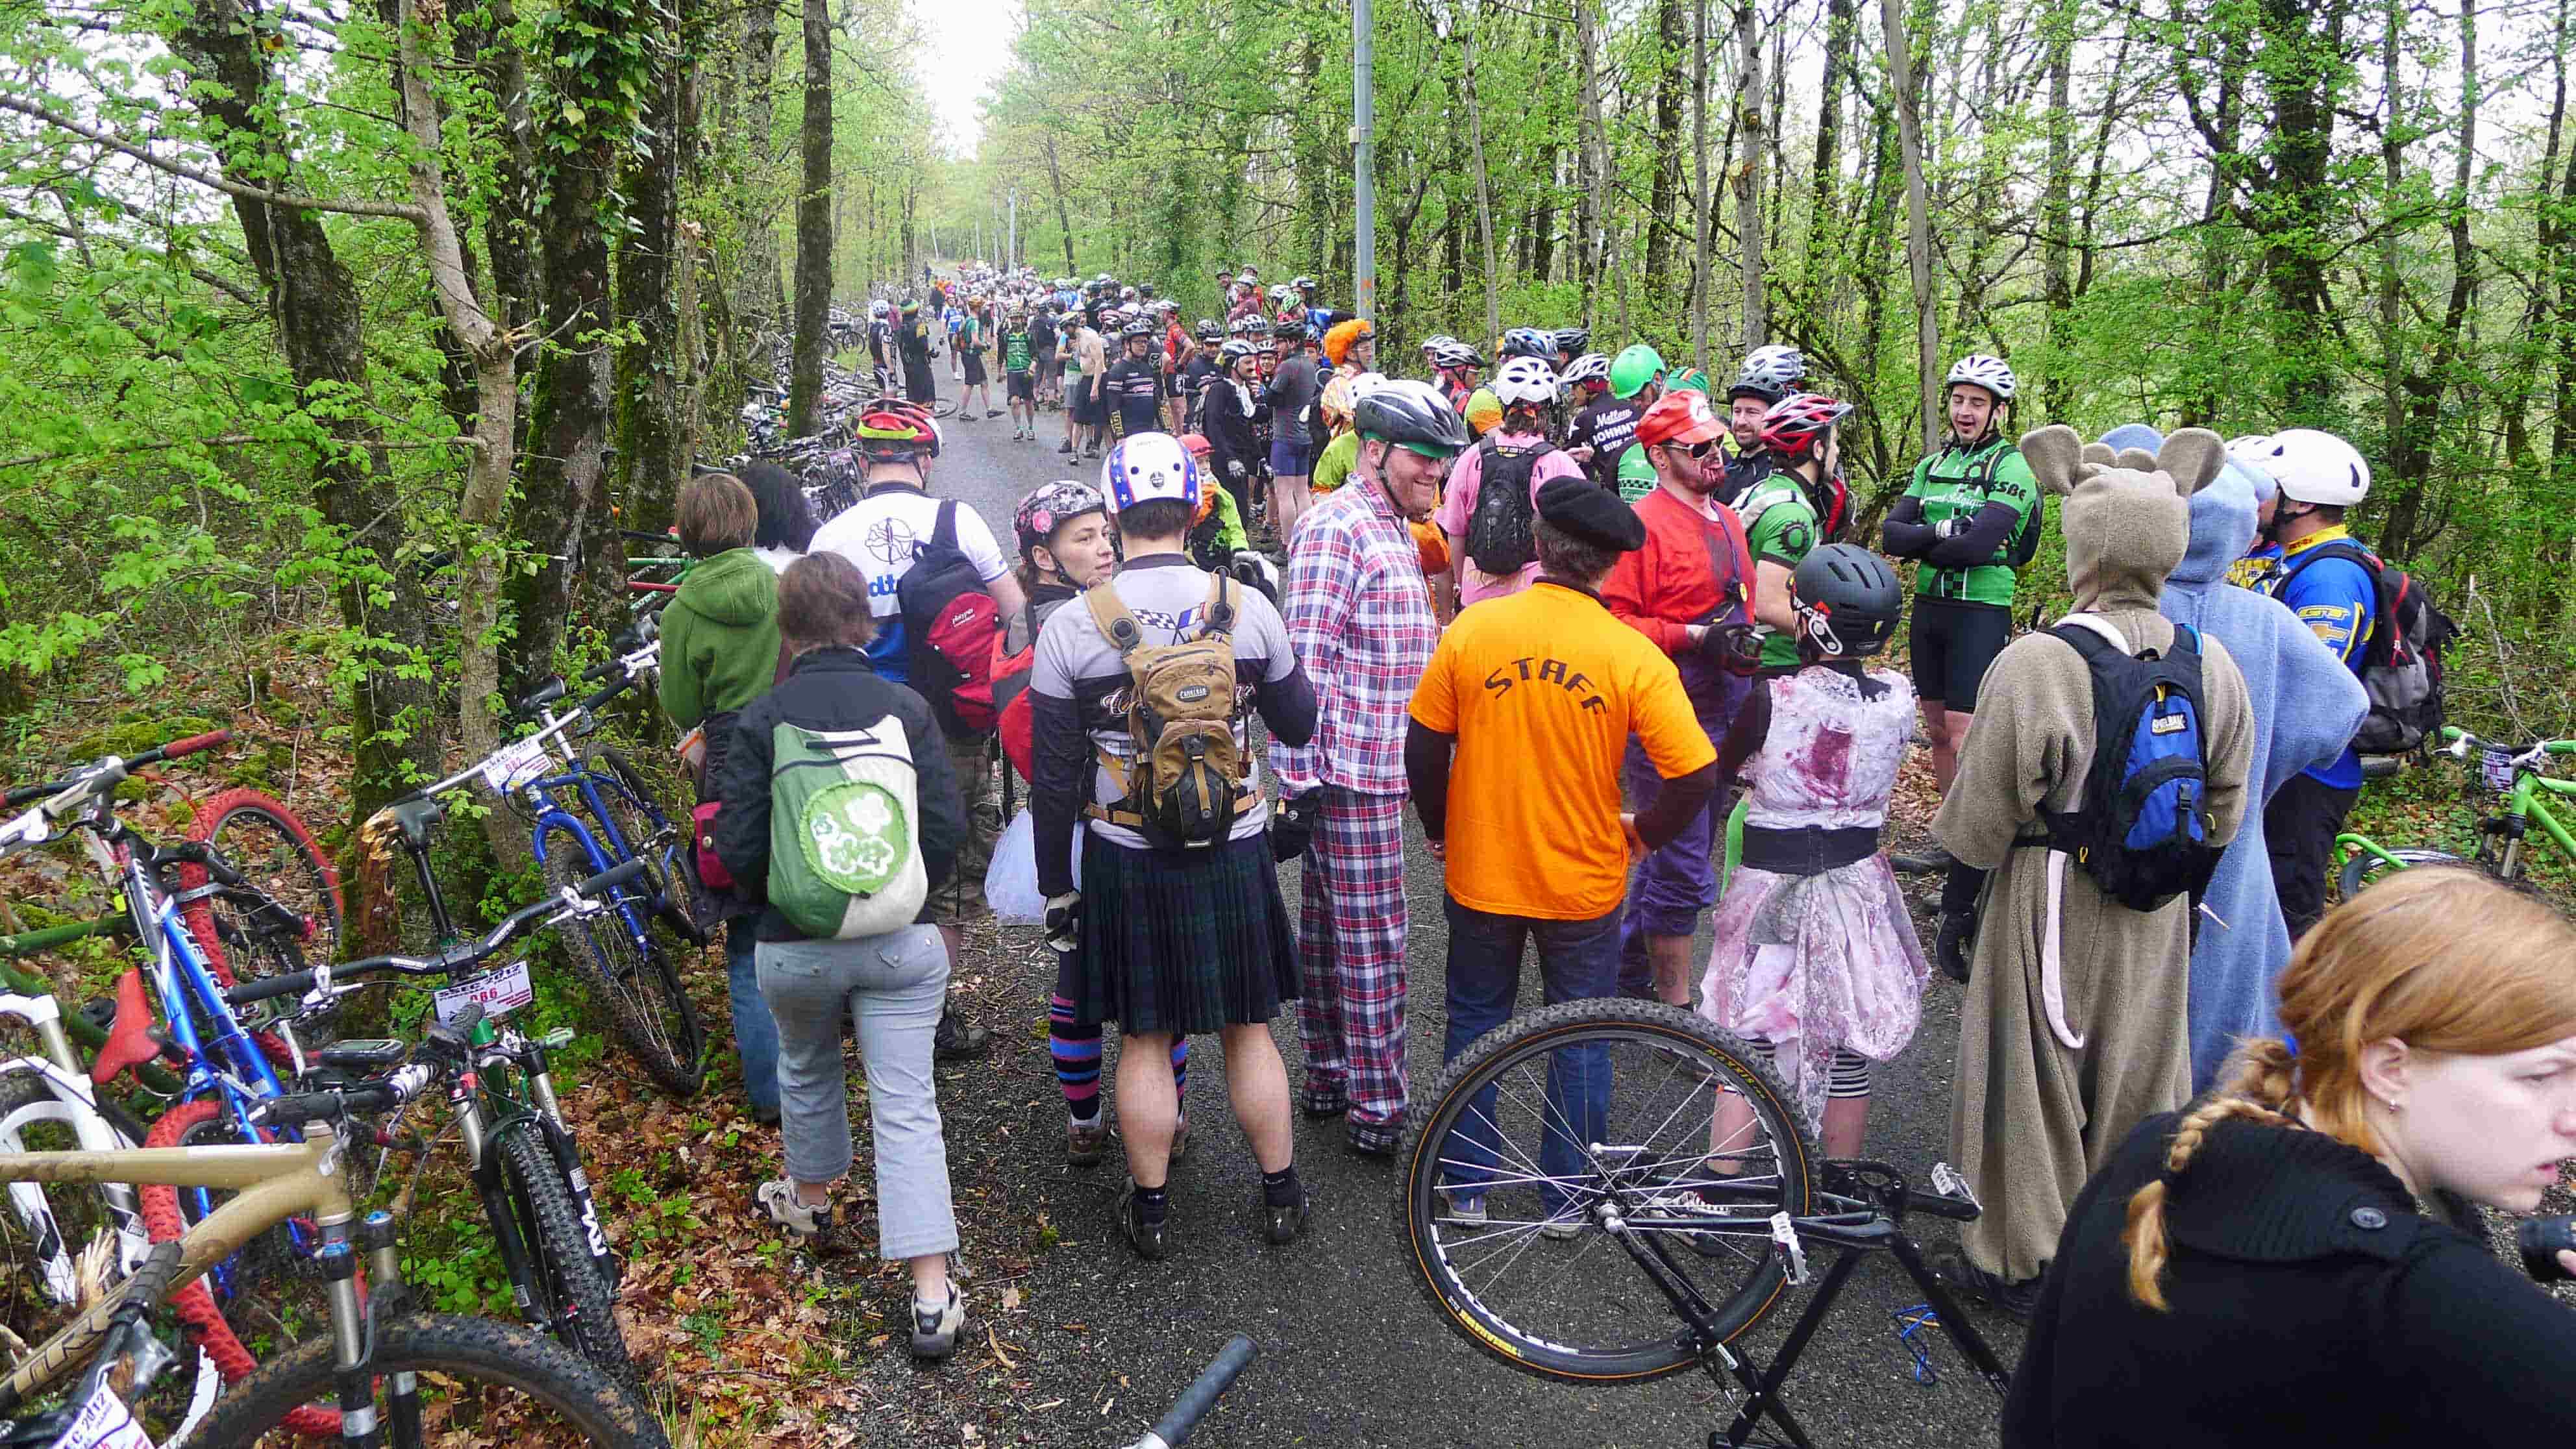 Straight-away view of a paved trail in the woods, with a large group cyclists standing all along it